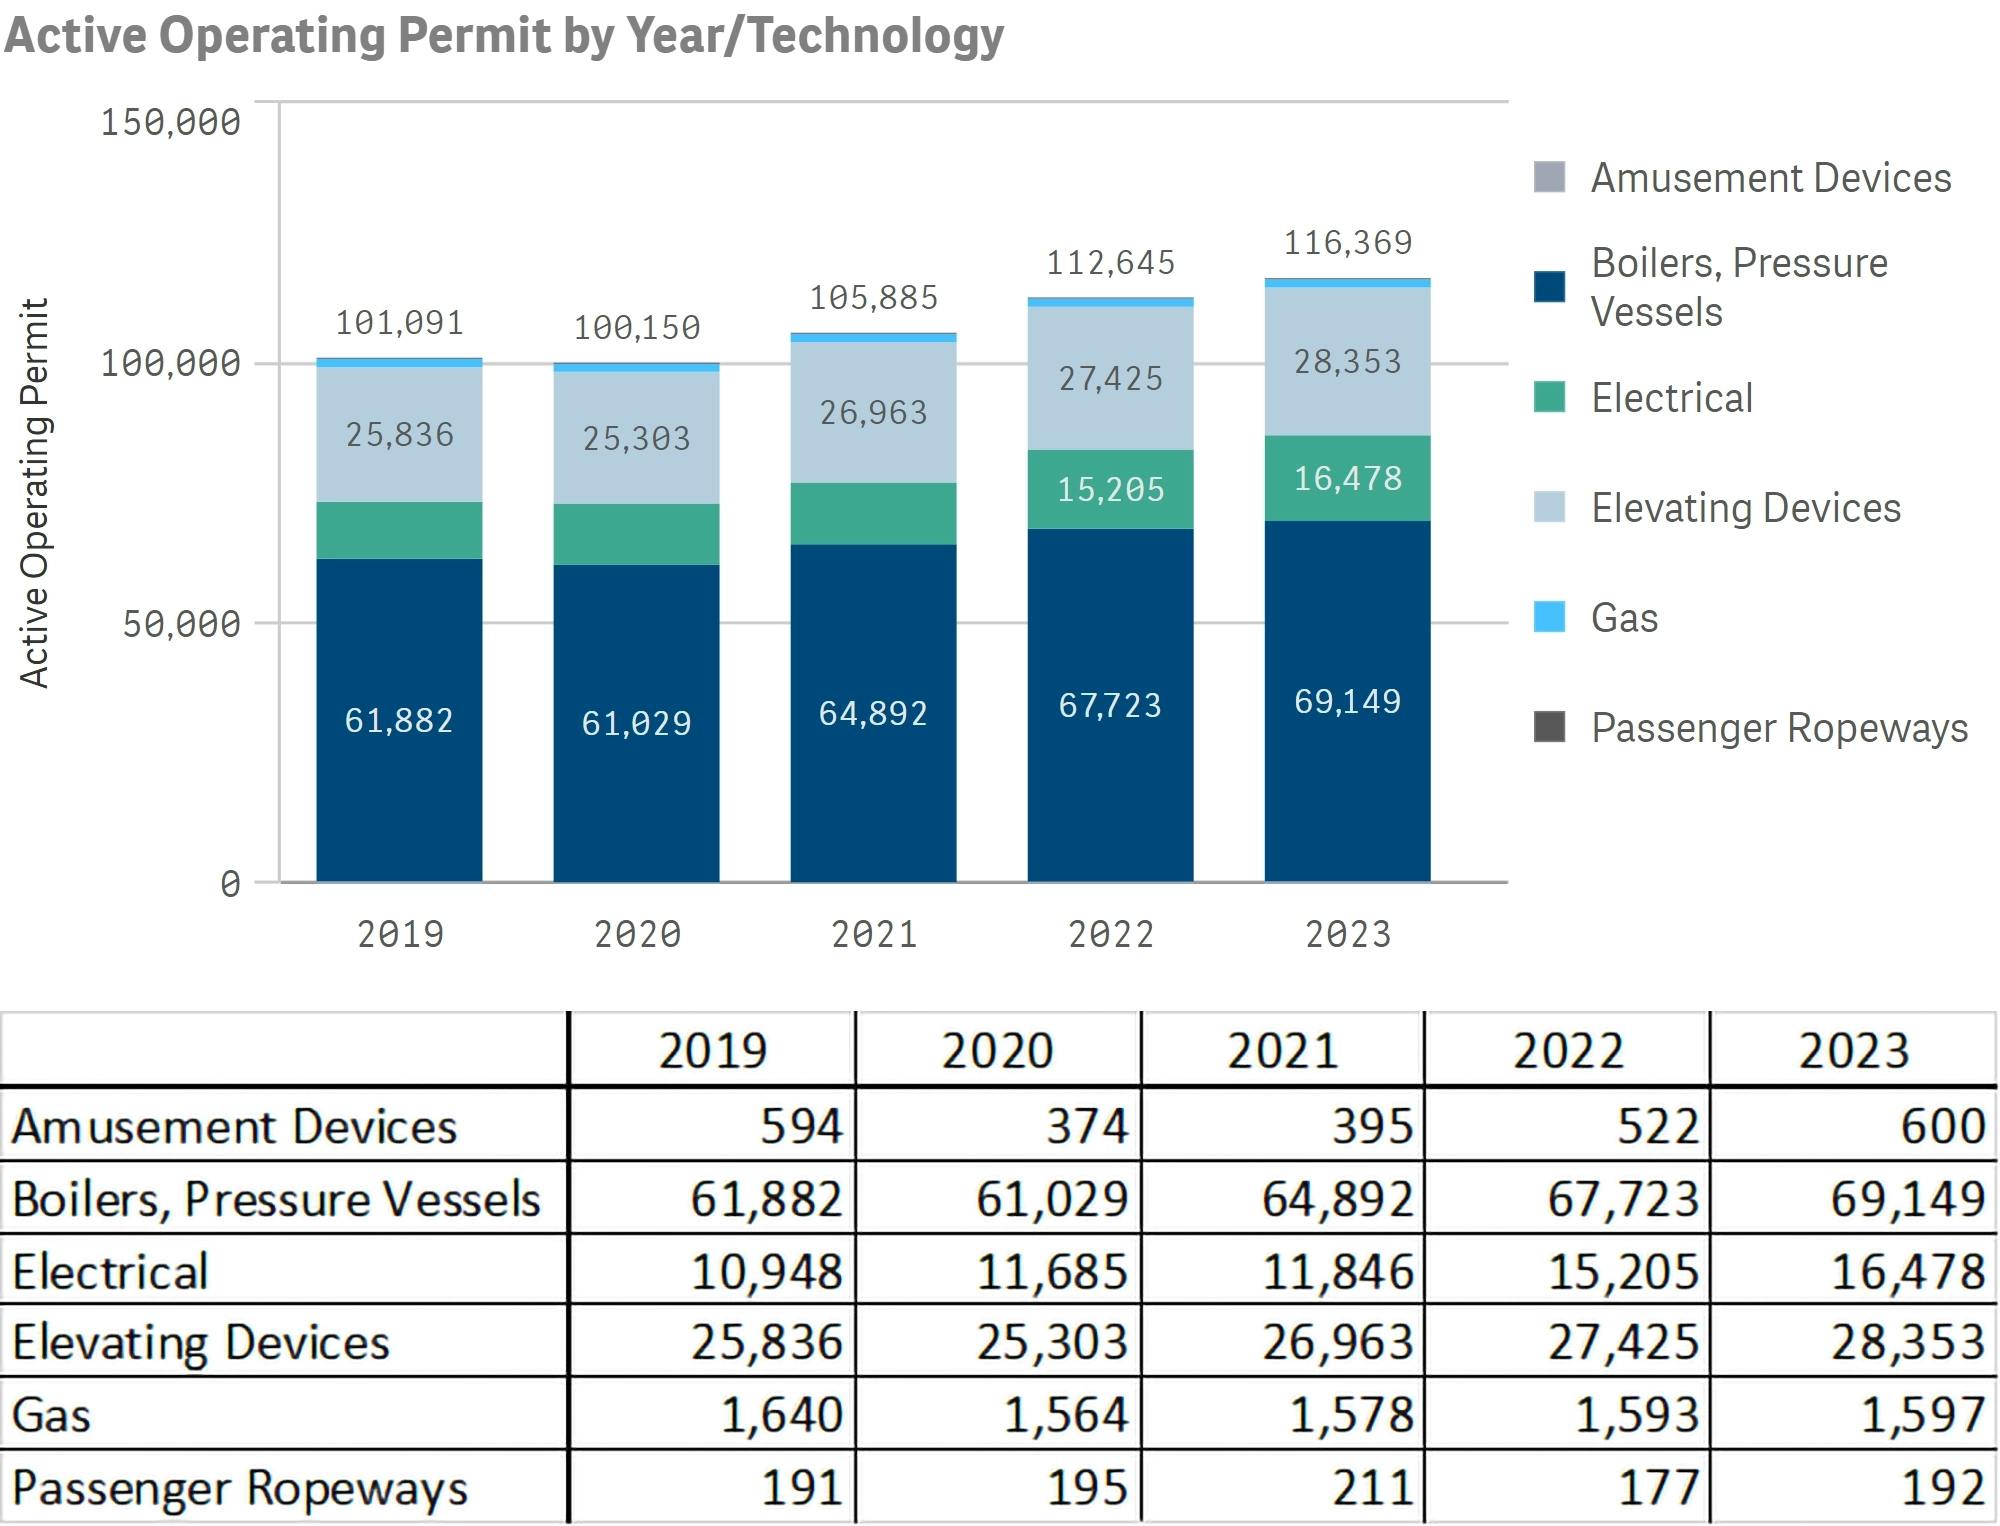 Active_Operating_Permit_by_Year_per_Technology.webp